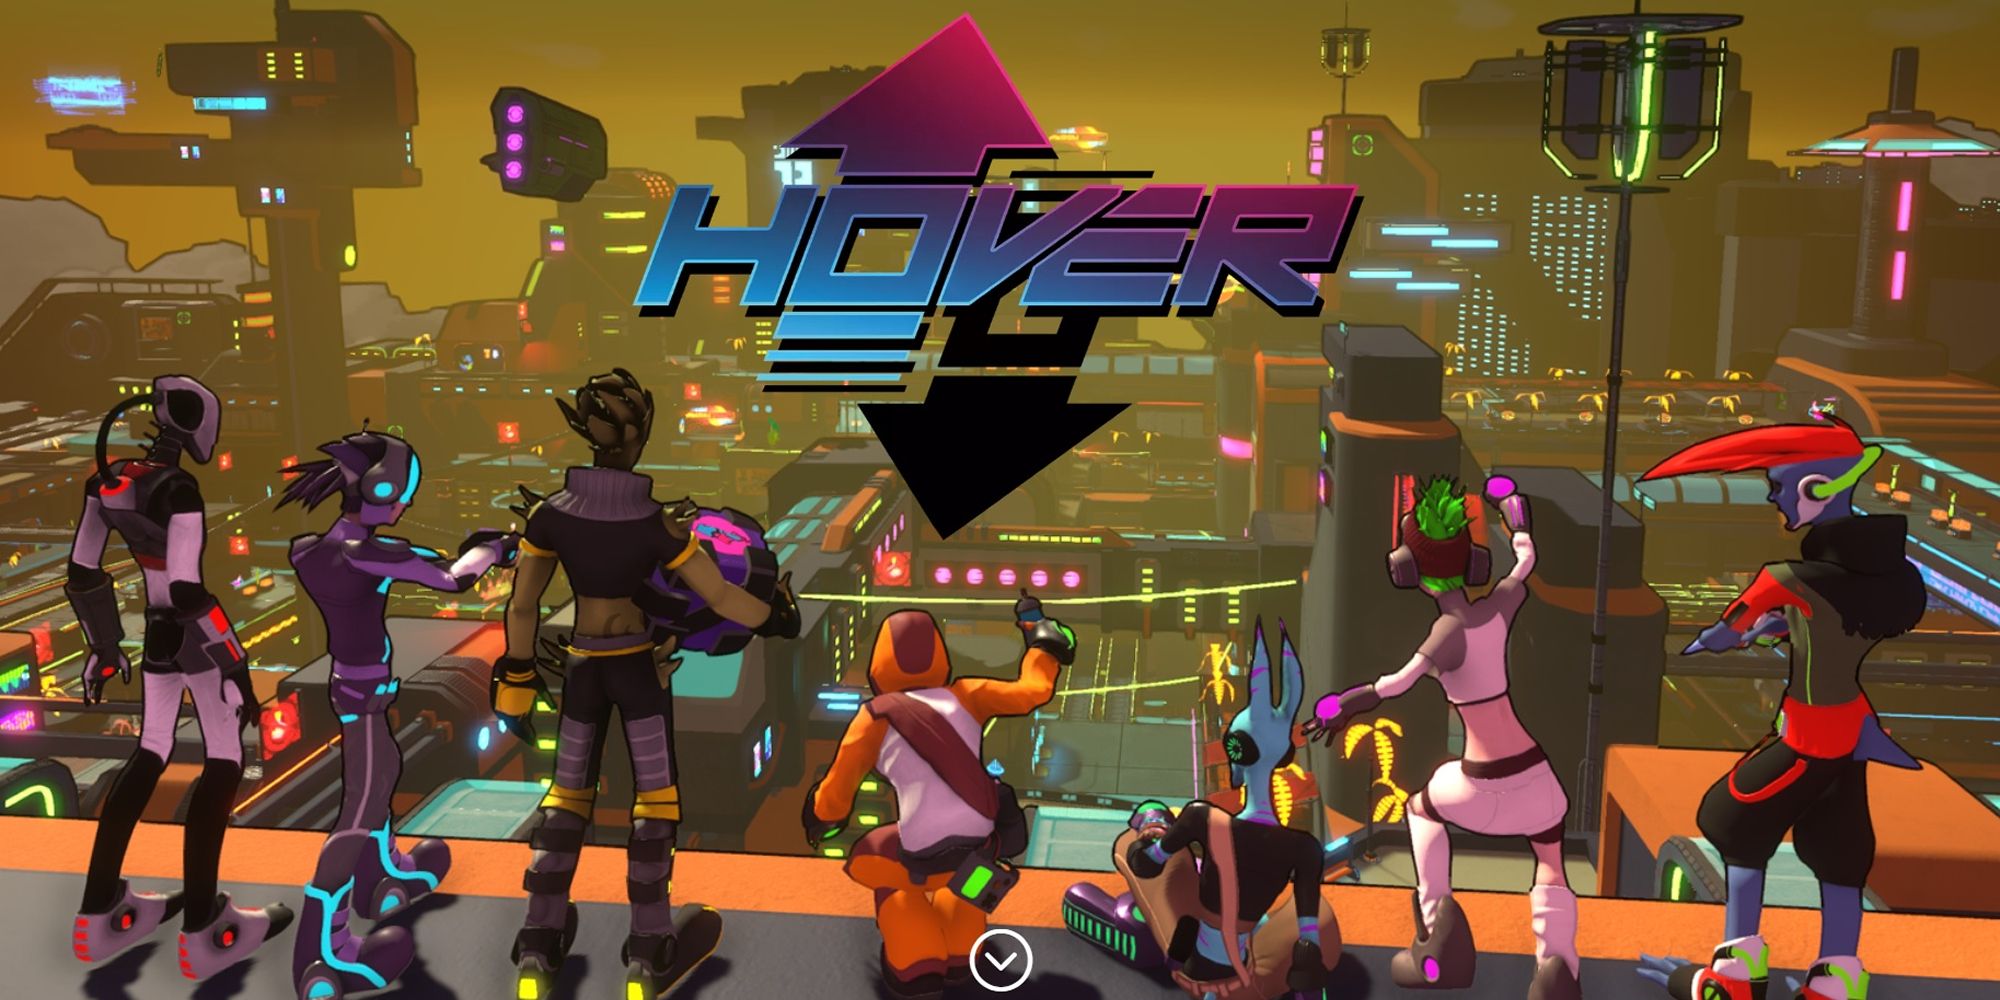 The Hover Cast Stares Out At The City